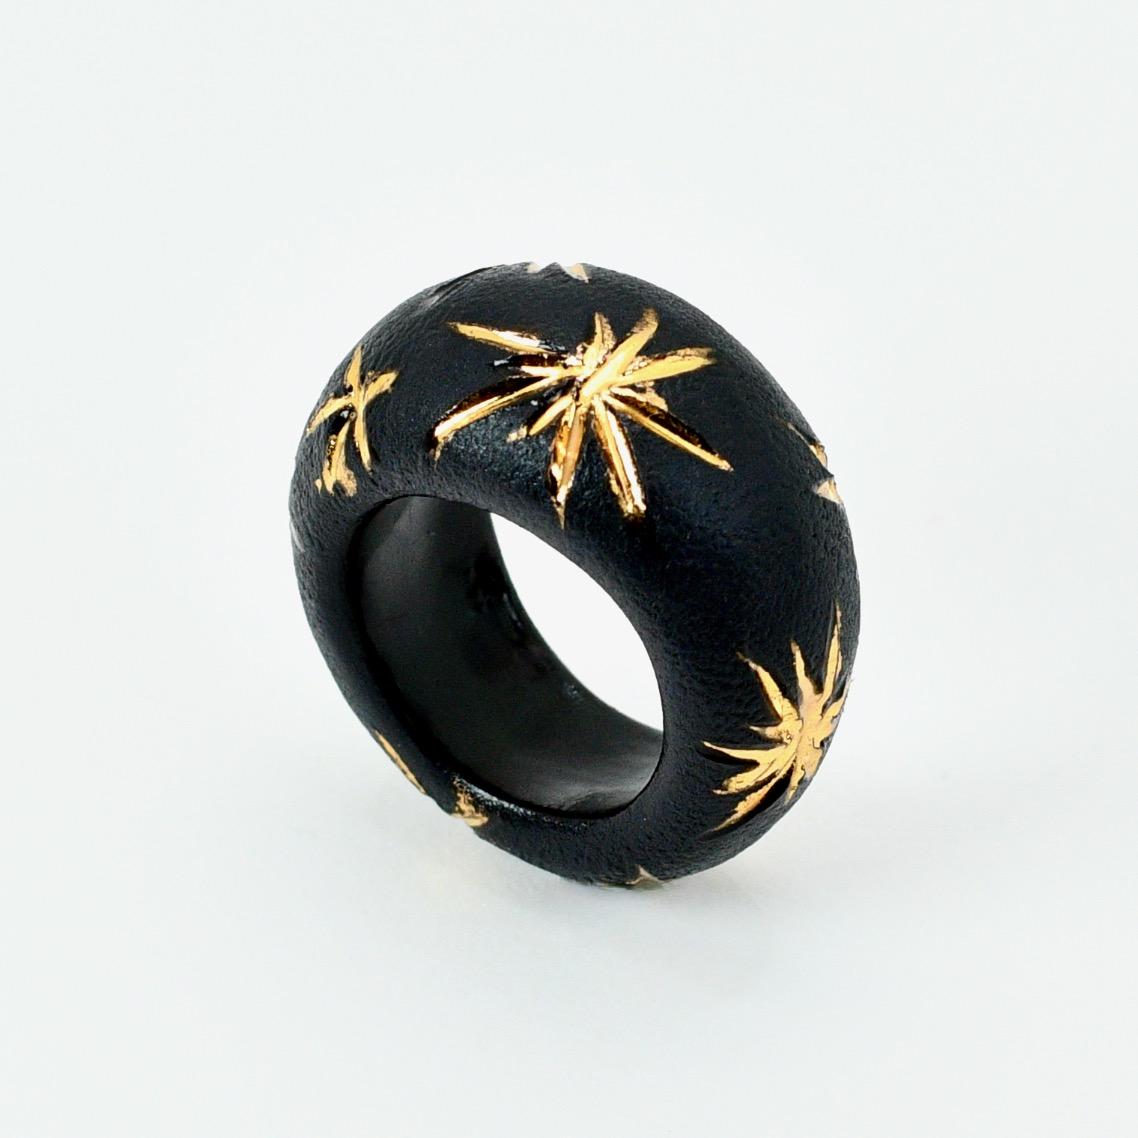 Porcelain  24K gold embellishment  Handmade in London

This porcelain ring is an exquisite piece of wearable art and surely a rare find. The ring is made from onyx black porcelain giving it a classy and earthy appearance. The shape of the ring is